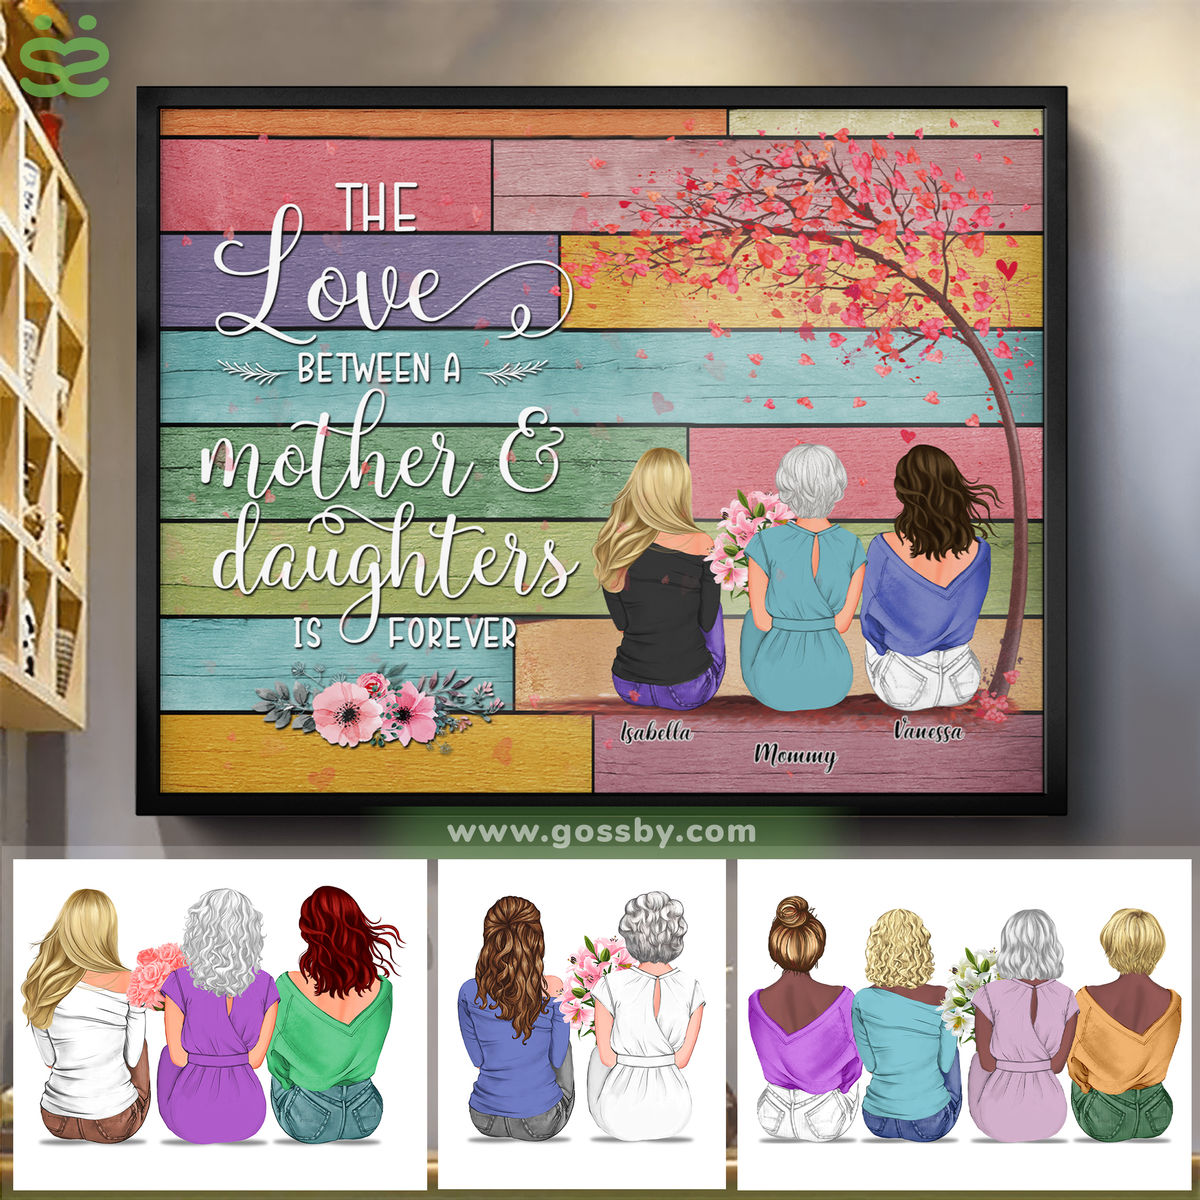 The Love Between a Mother And Daughters is Forever 2D - Vintage BG